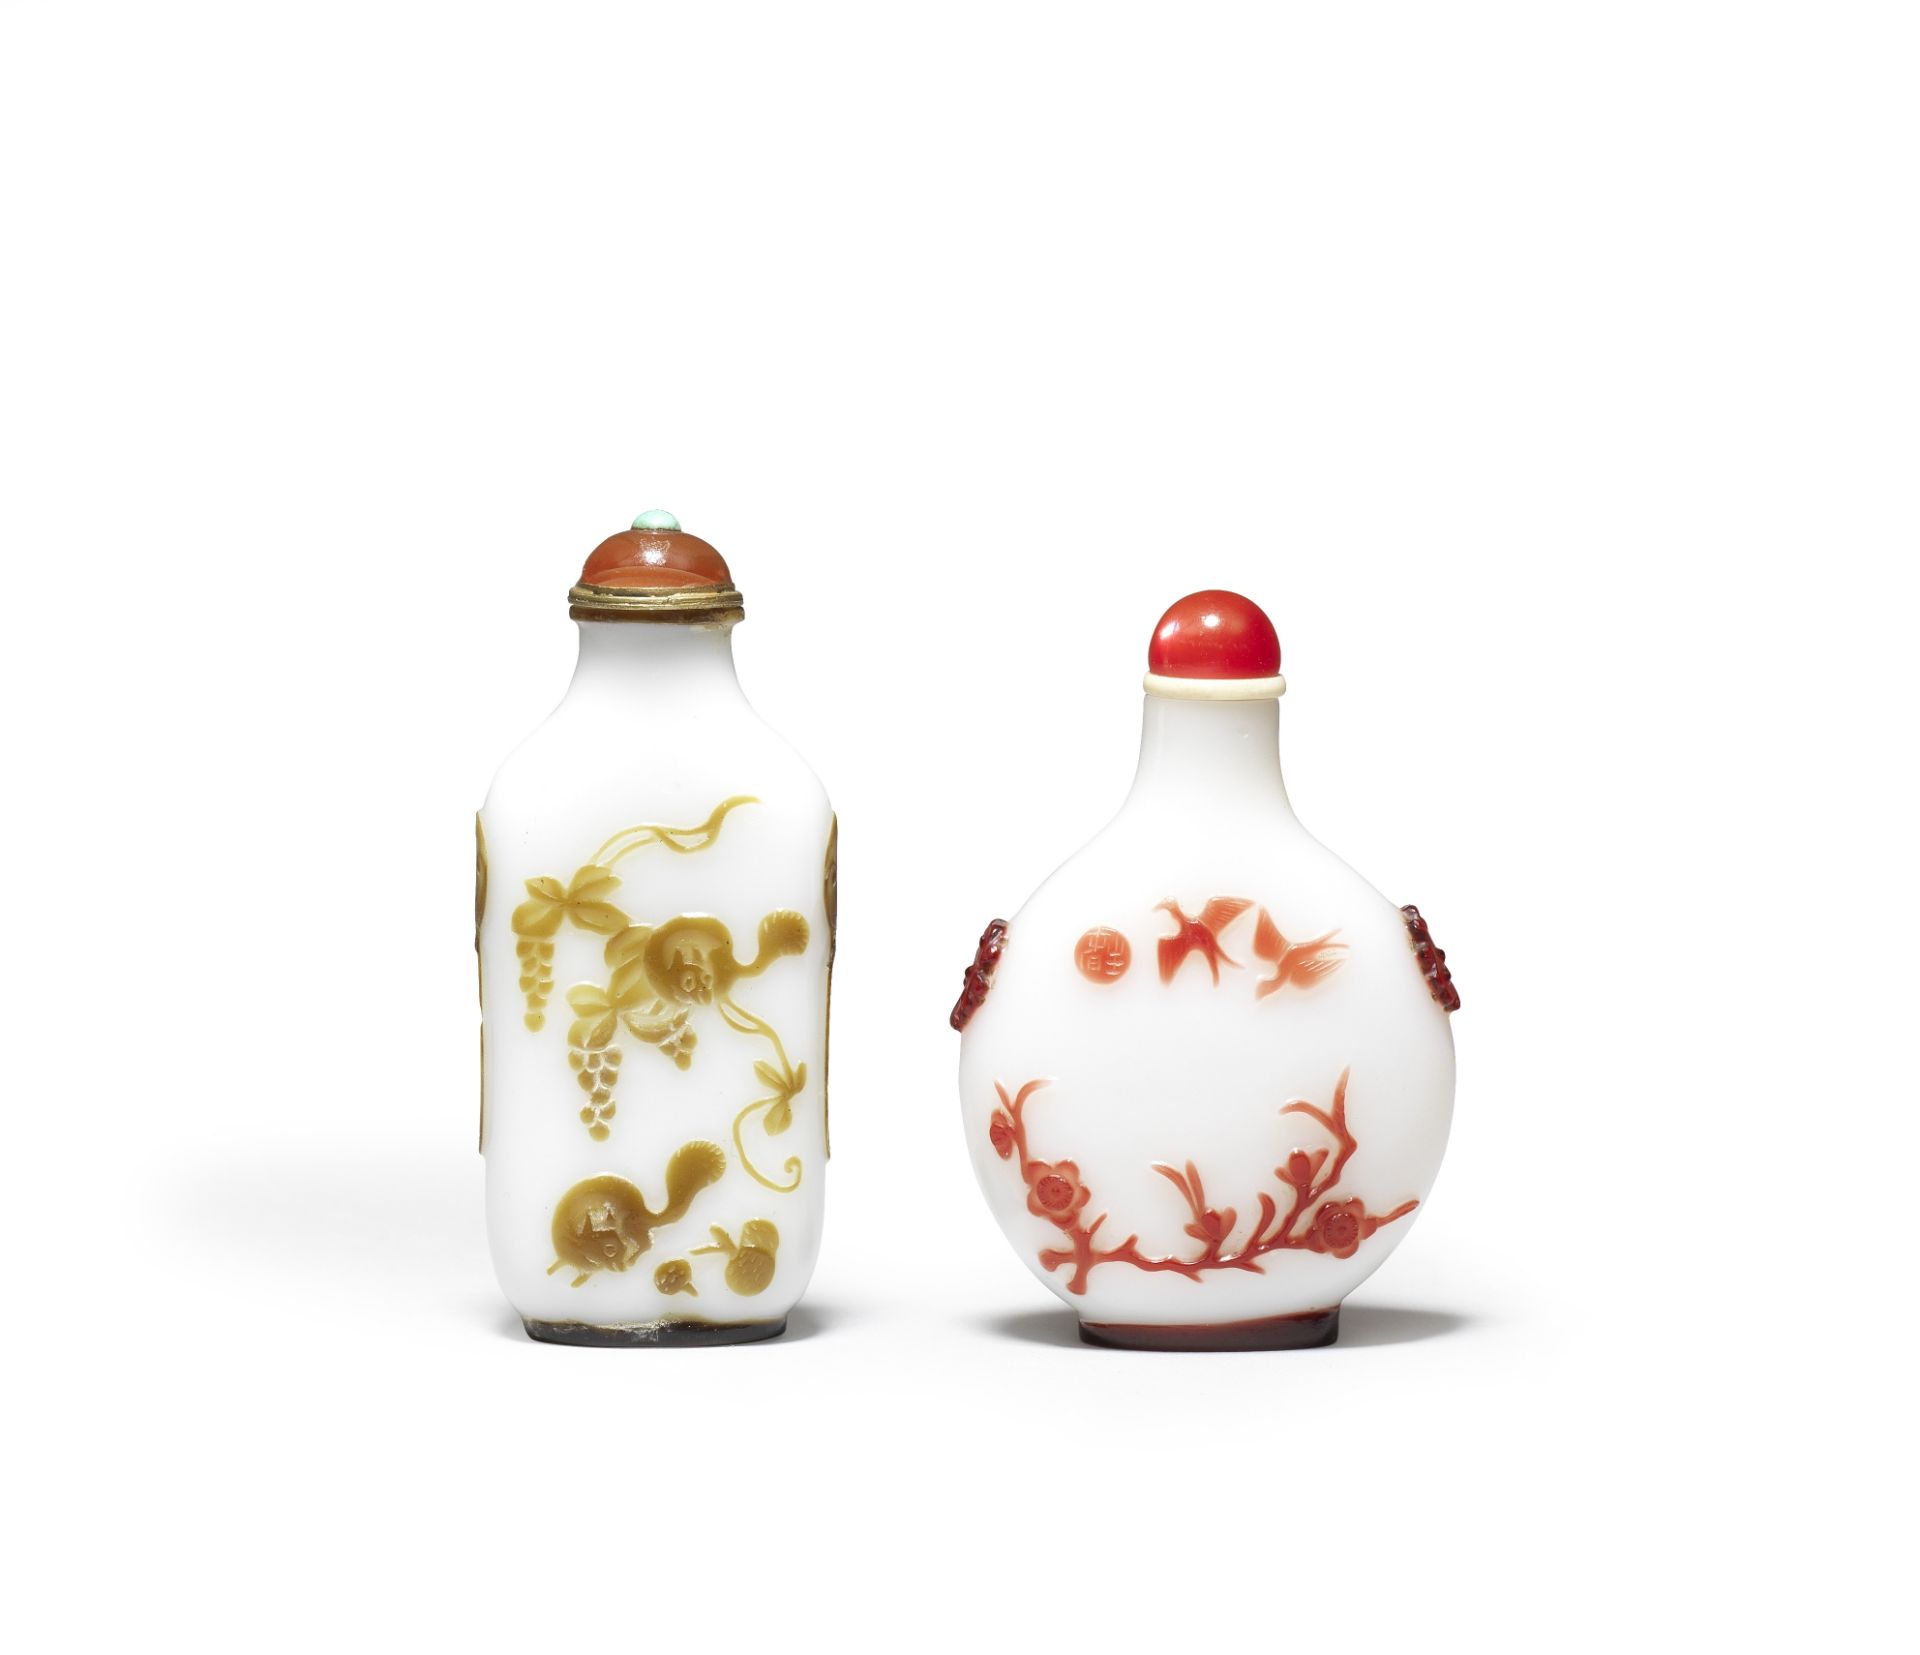 A red overlay glass snuff bottle Possibly Yangzhou, seal Shengchun, 19th century (4)